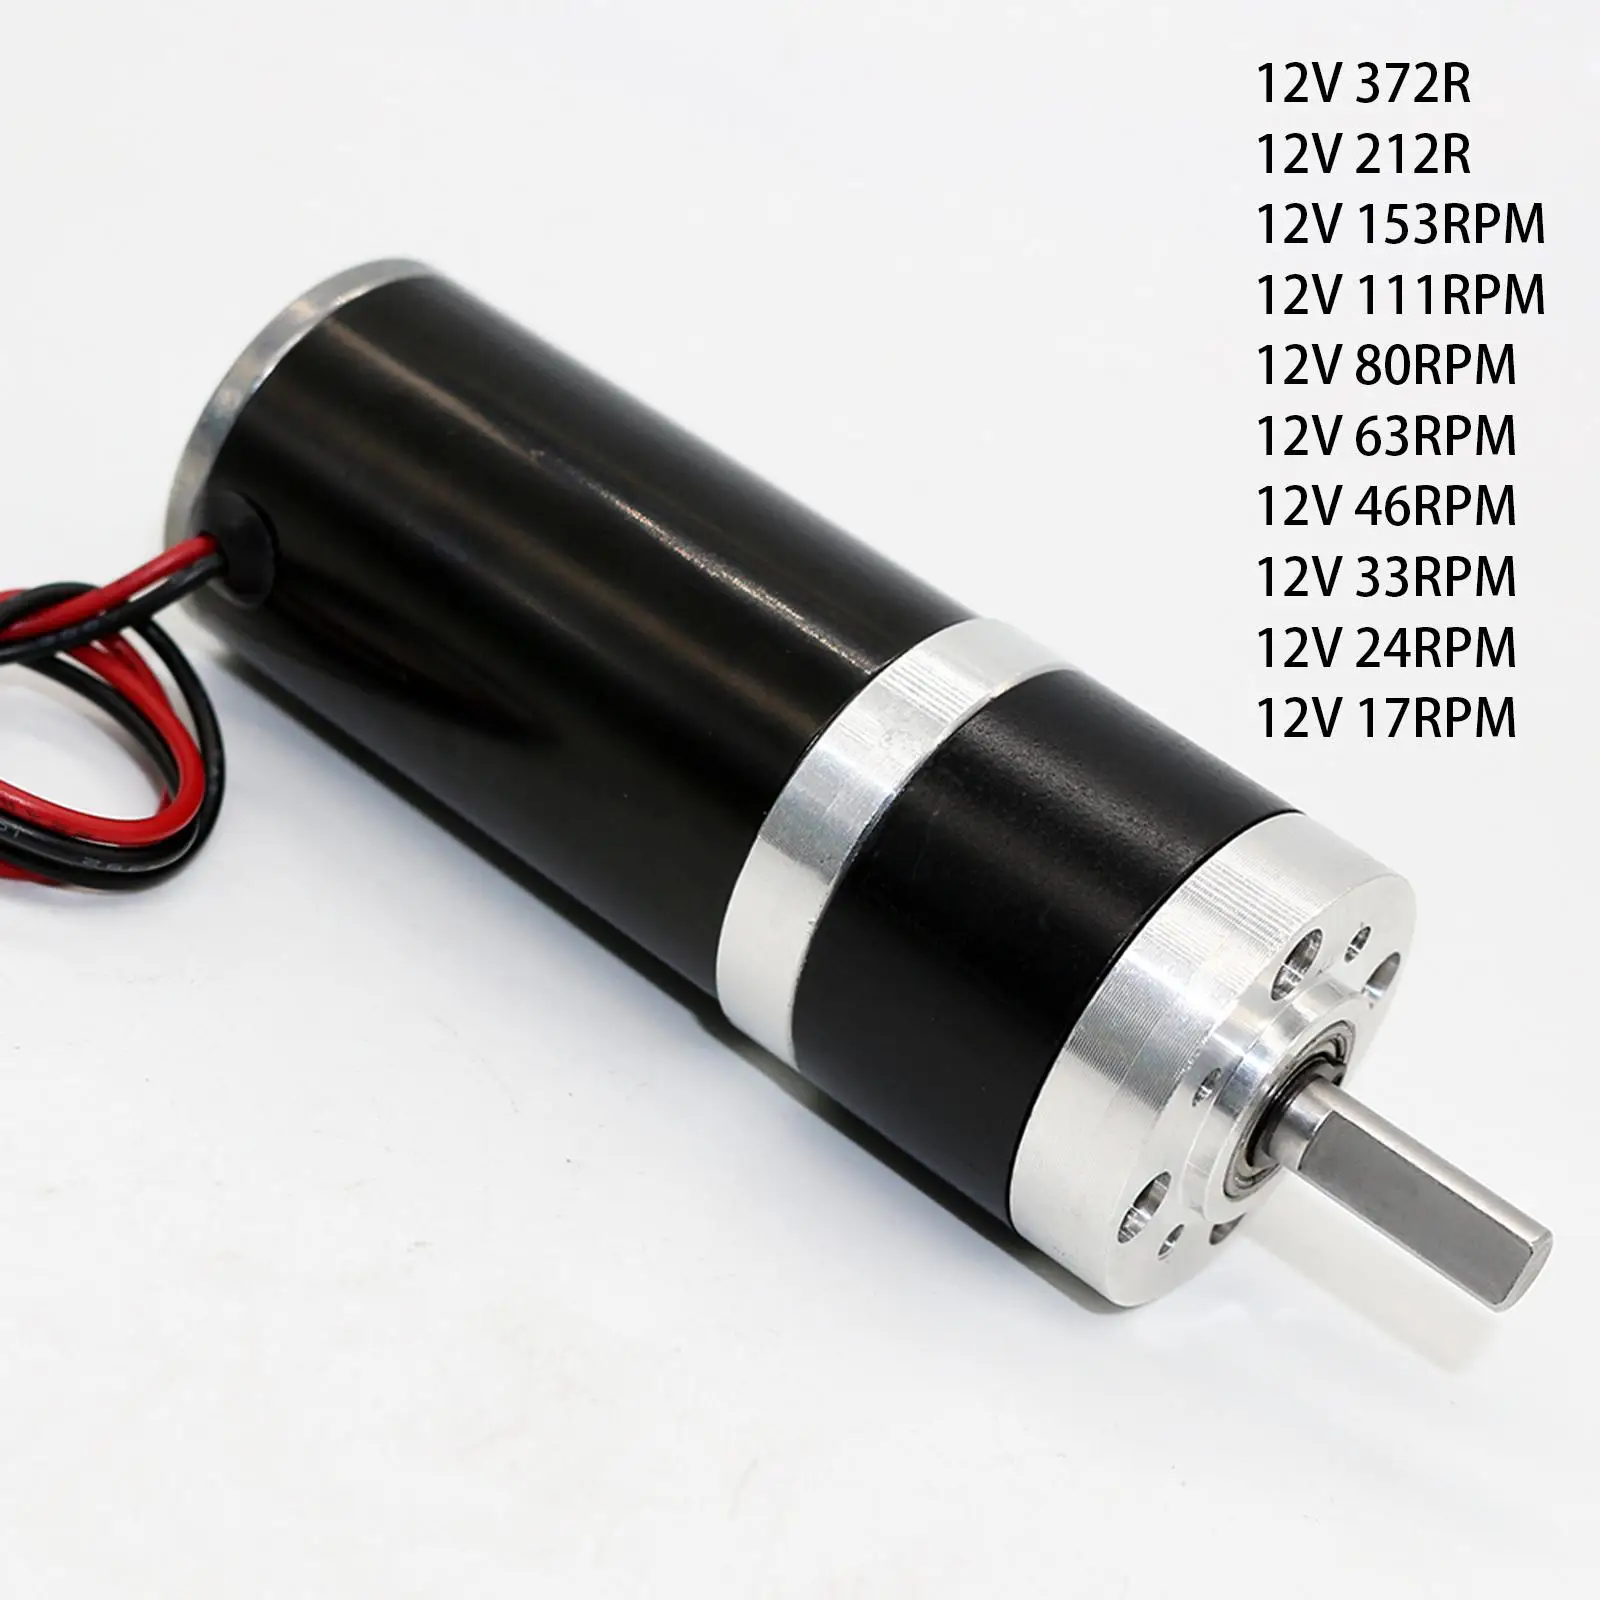 Geared Motor Micro Reversible Sturdy Motor Speed Reduction Geared Motor for Robot High Precision Measuring Instrument Car Parts